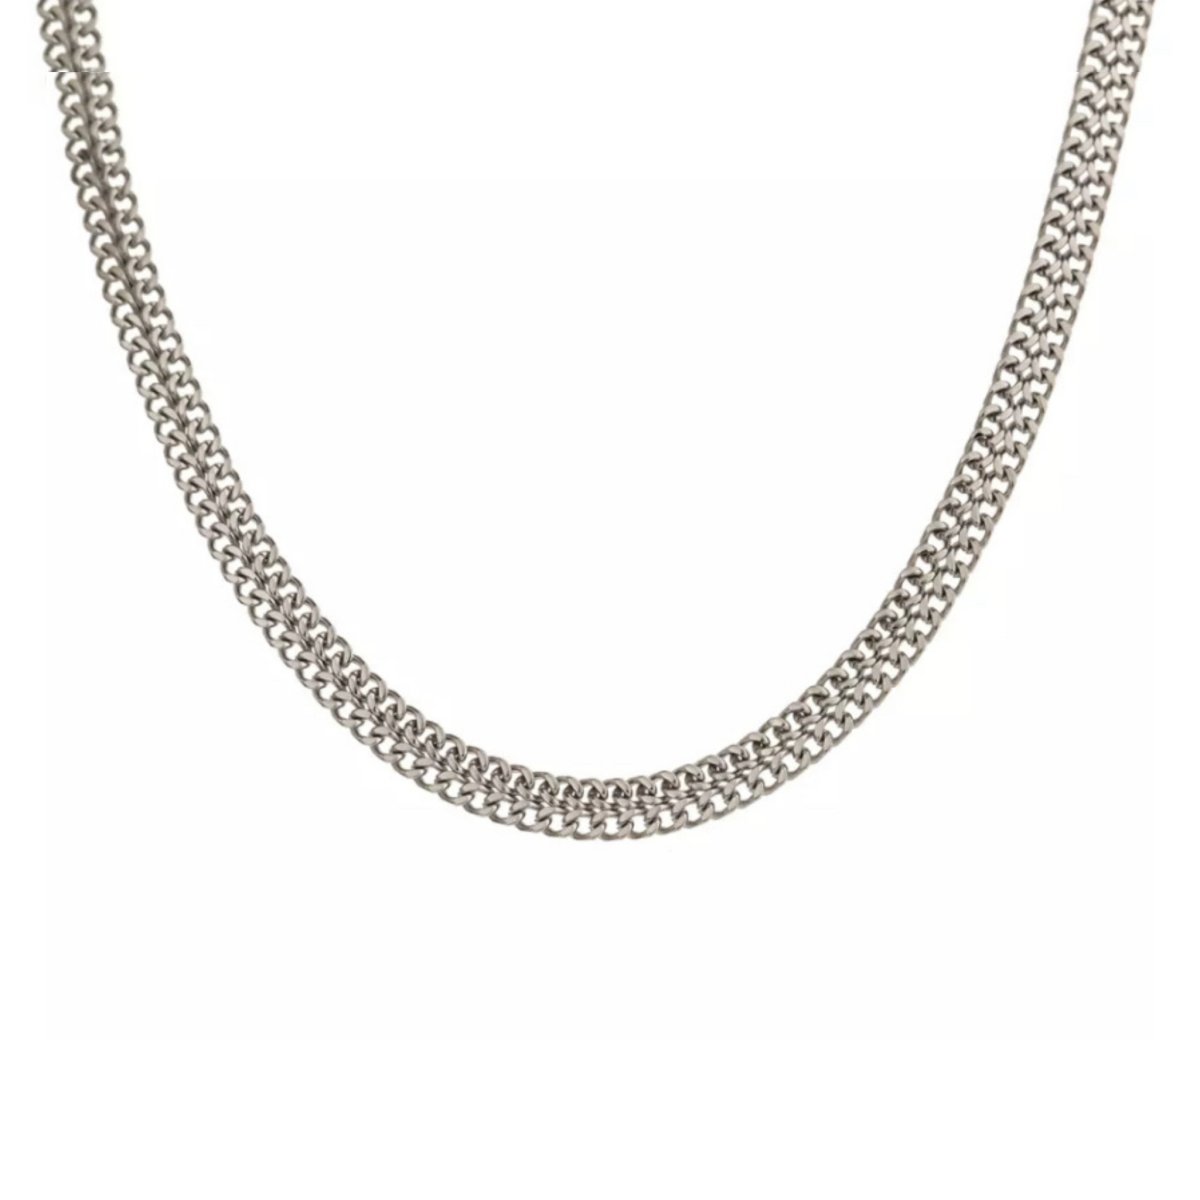 The Charlie Chain Necklace Silver - C.J.ROCKER